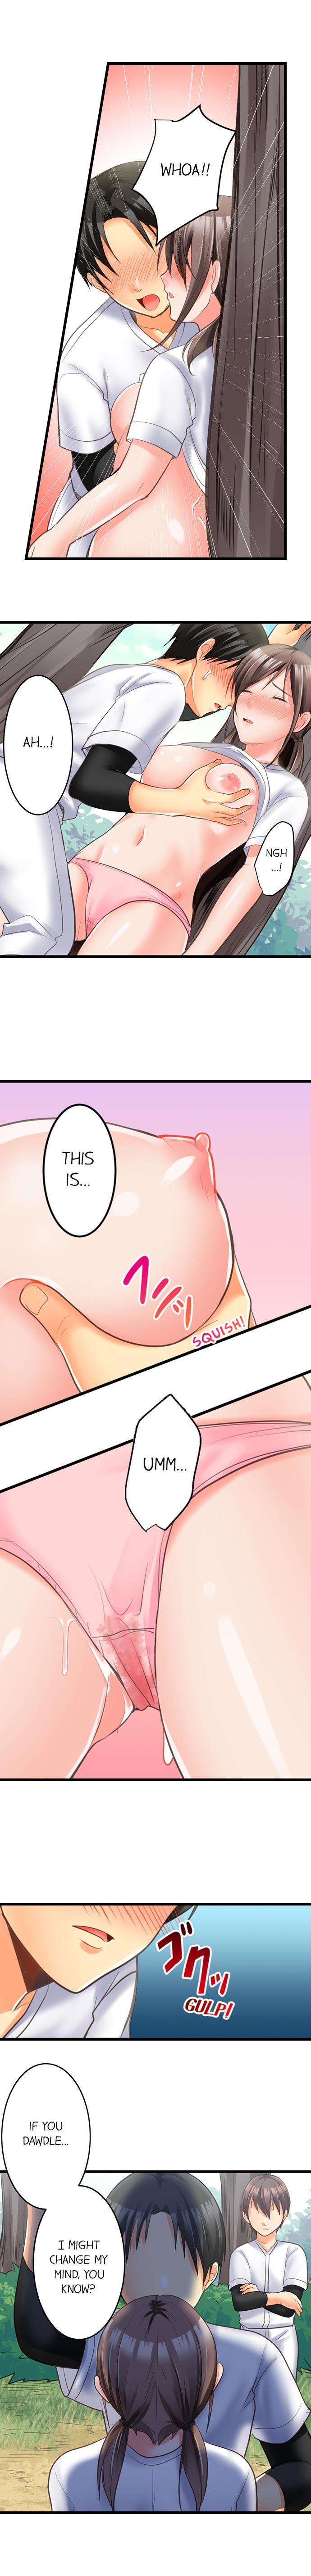 The Day She Became a Sex Toy (Complete] 67